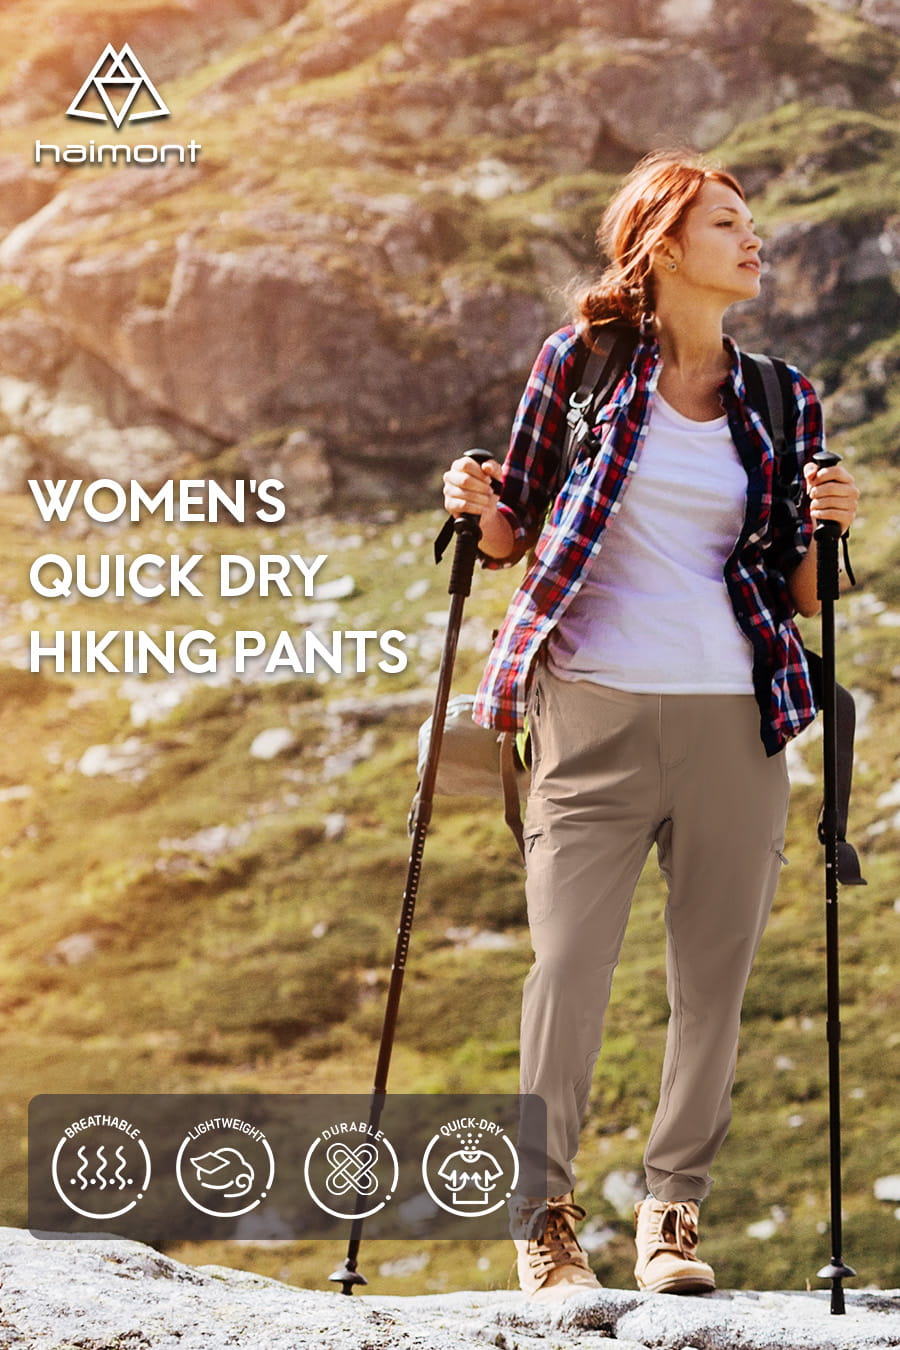 Haimont Women's Quick Dry Hiking Cargo Pants with Zip Pockets